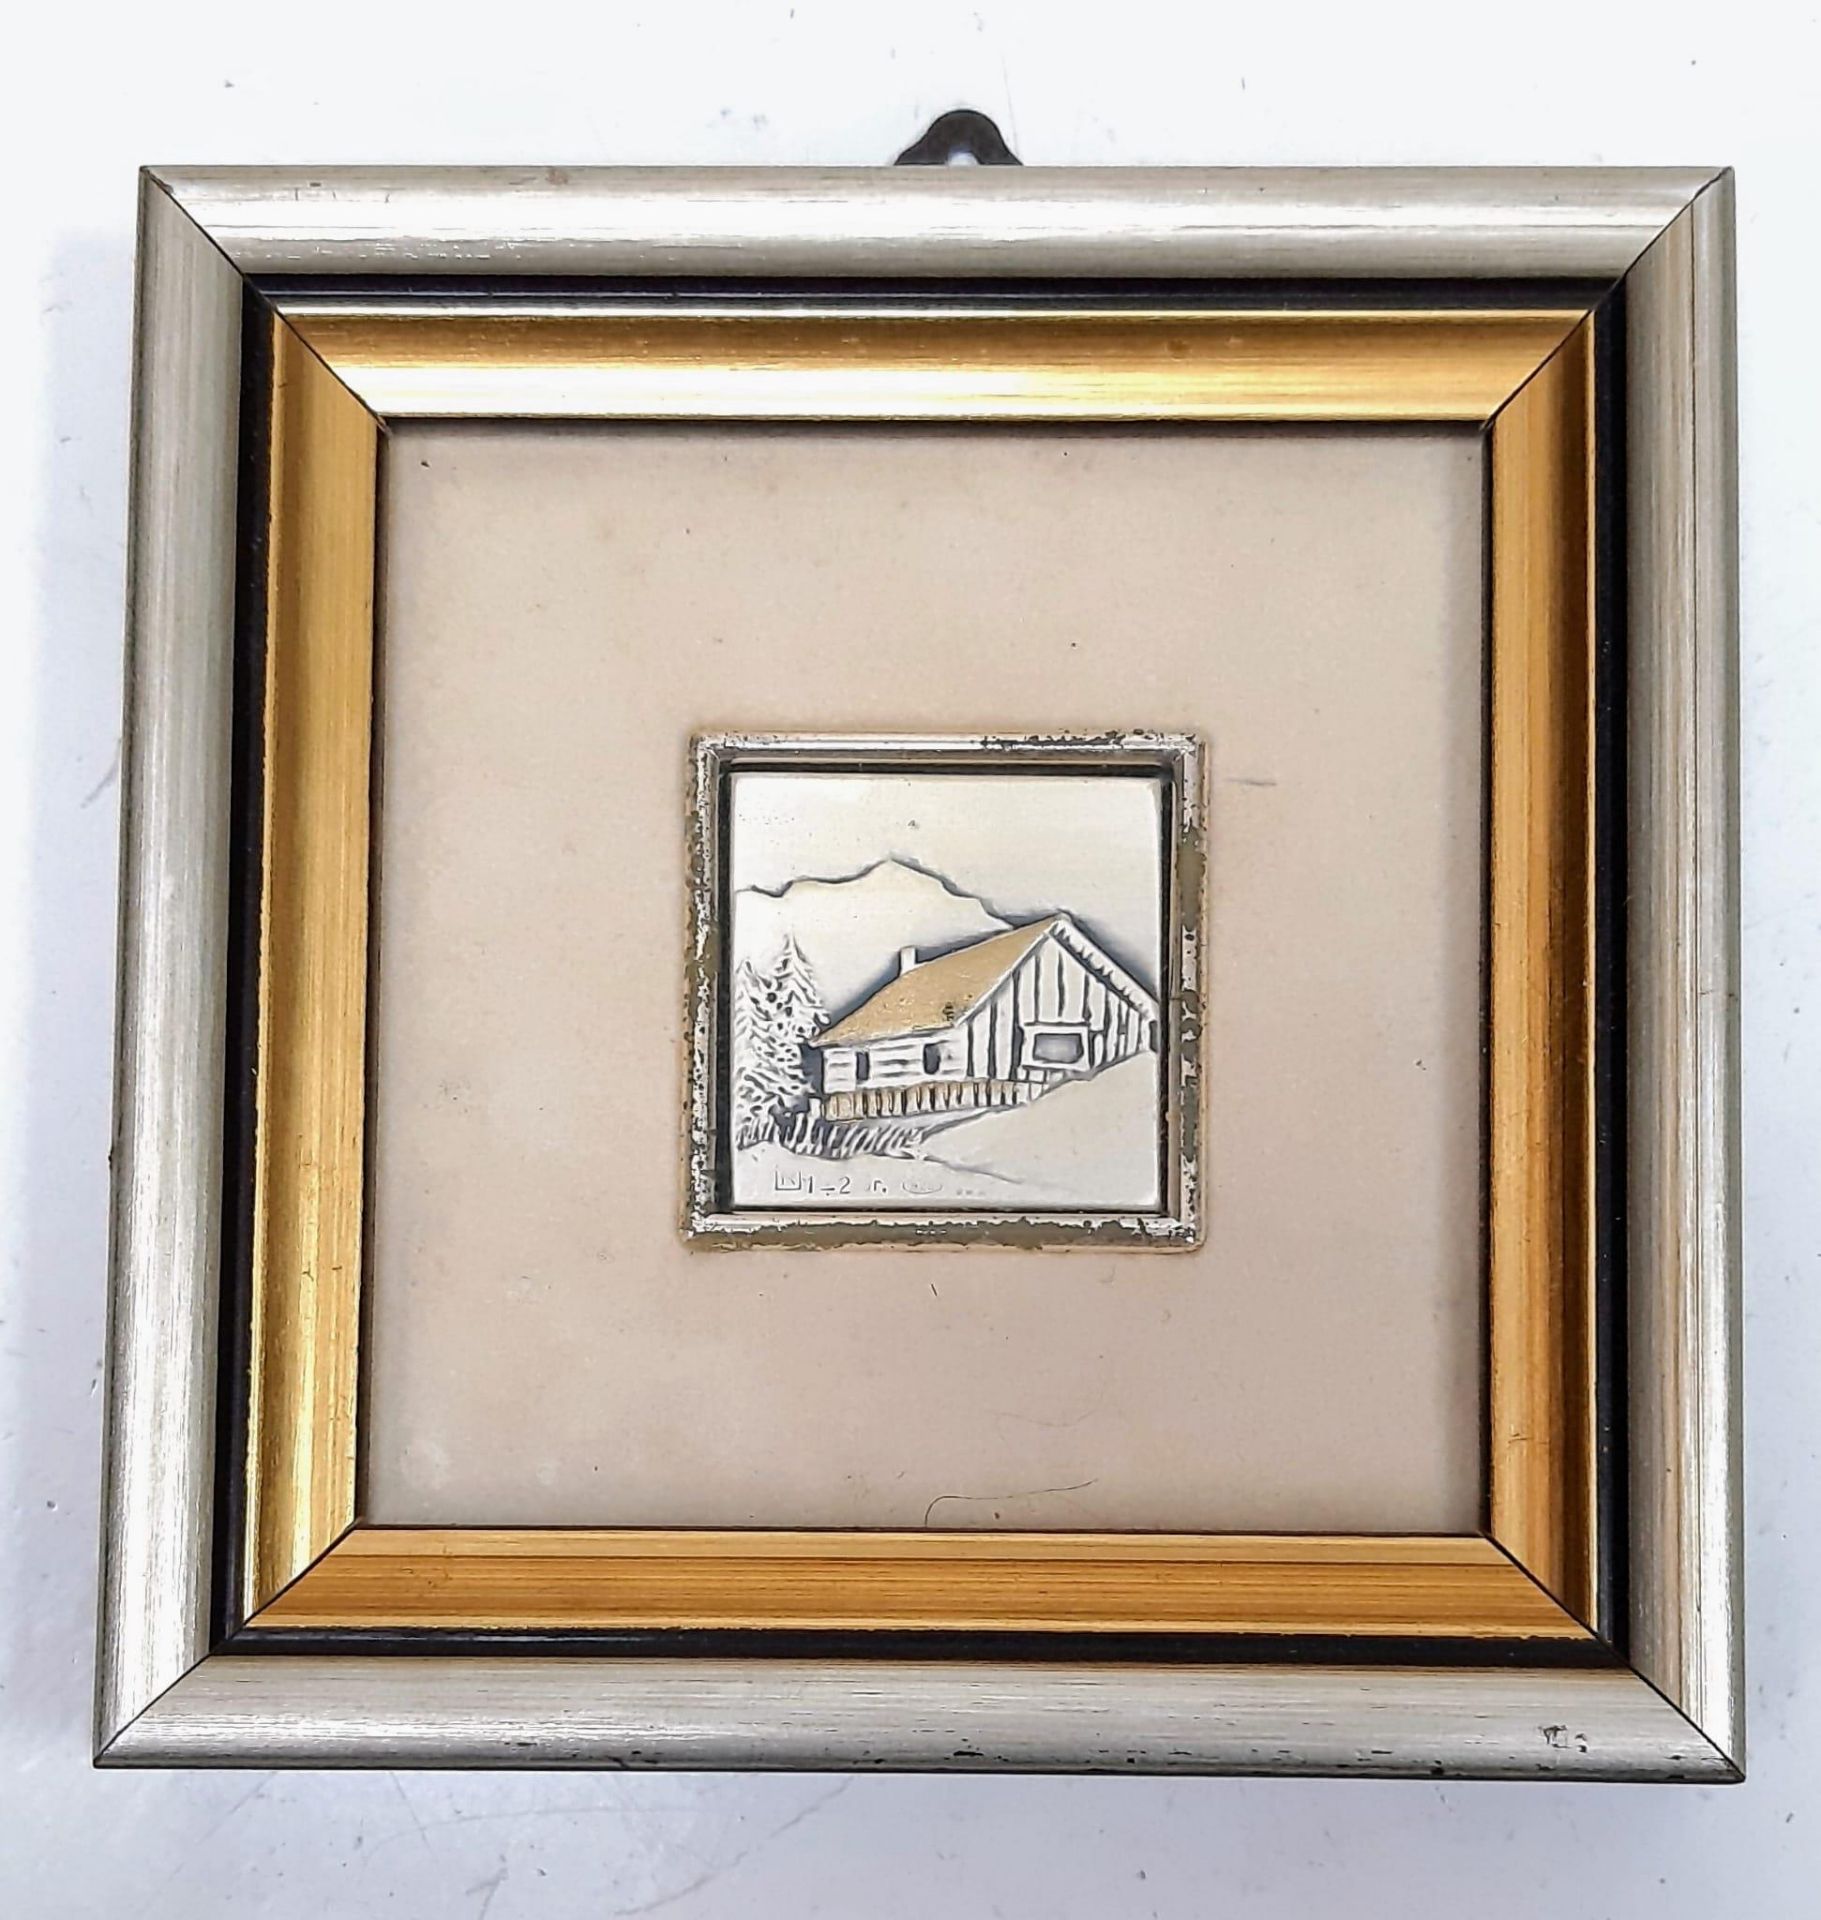 A Paolo Romini 925 Silver Picture in Frame - 12cm x 12cm.